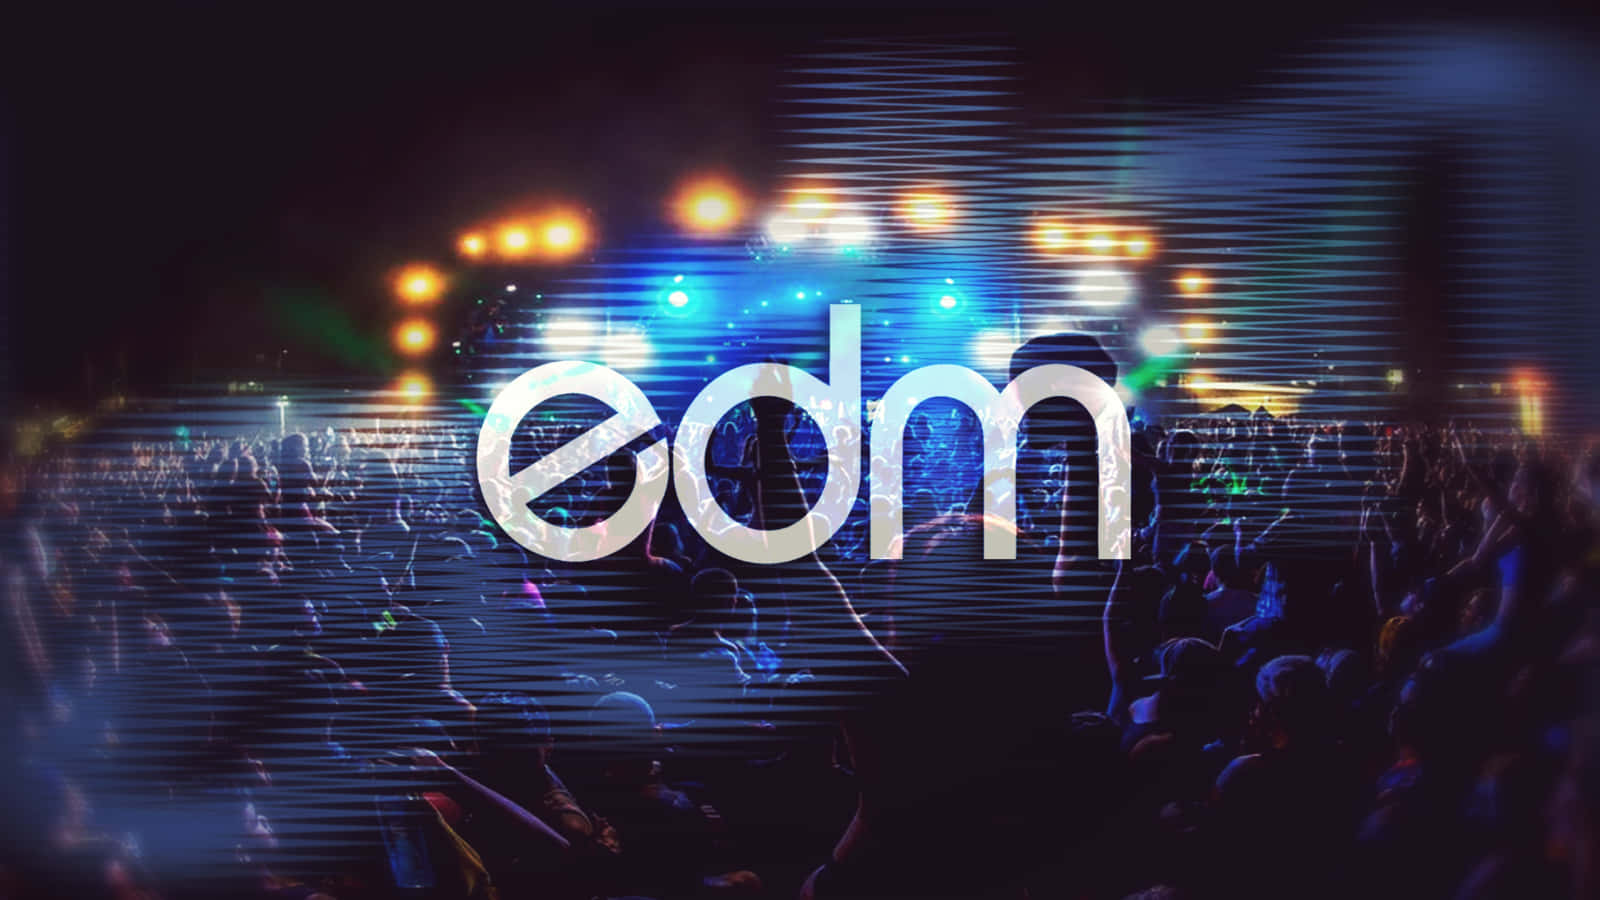 edm logo with a crowd at a concert Wallpaper